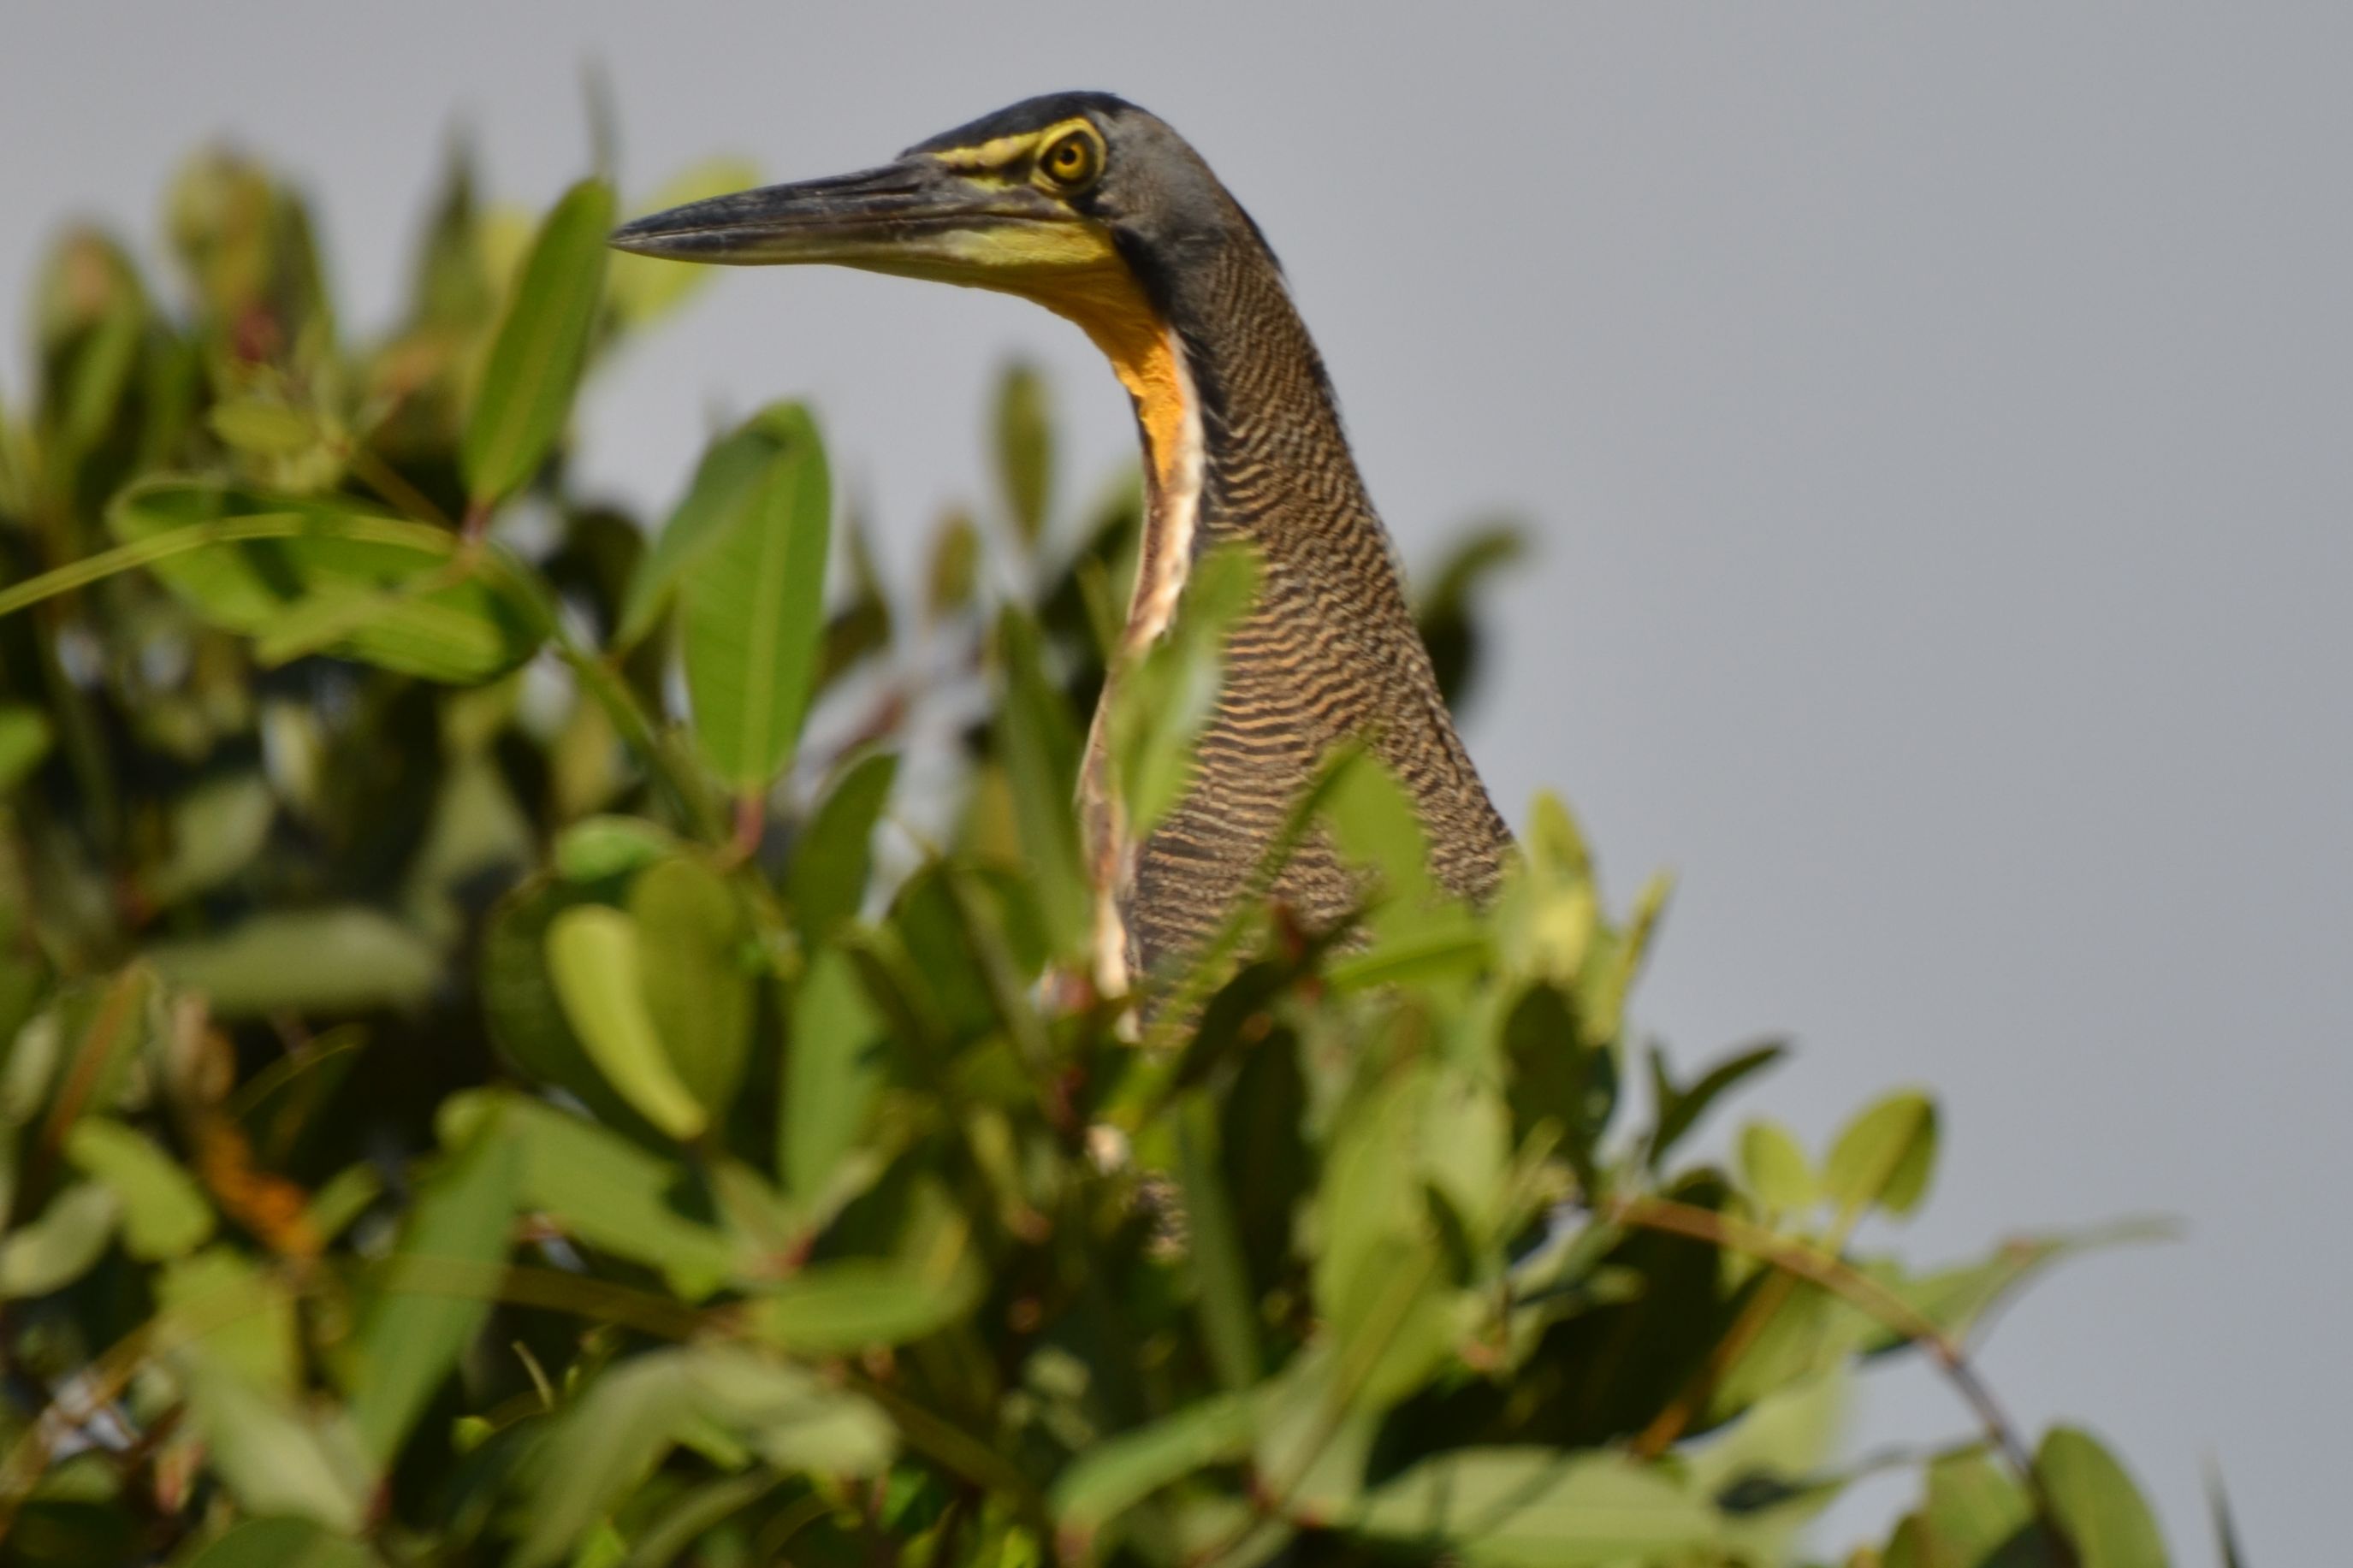 Click picture to see more Bare-throated Tiger-Herons.